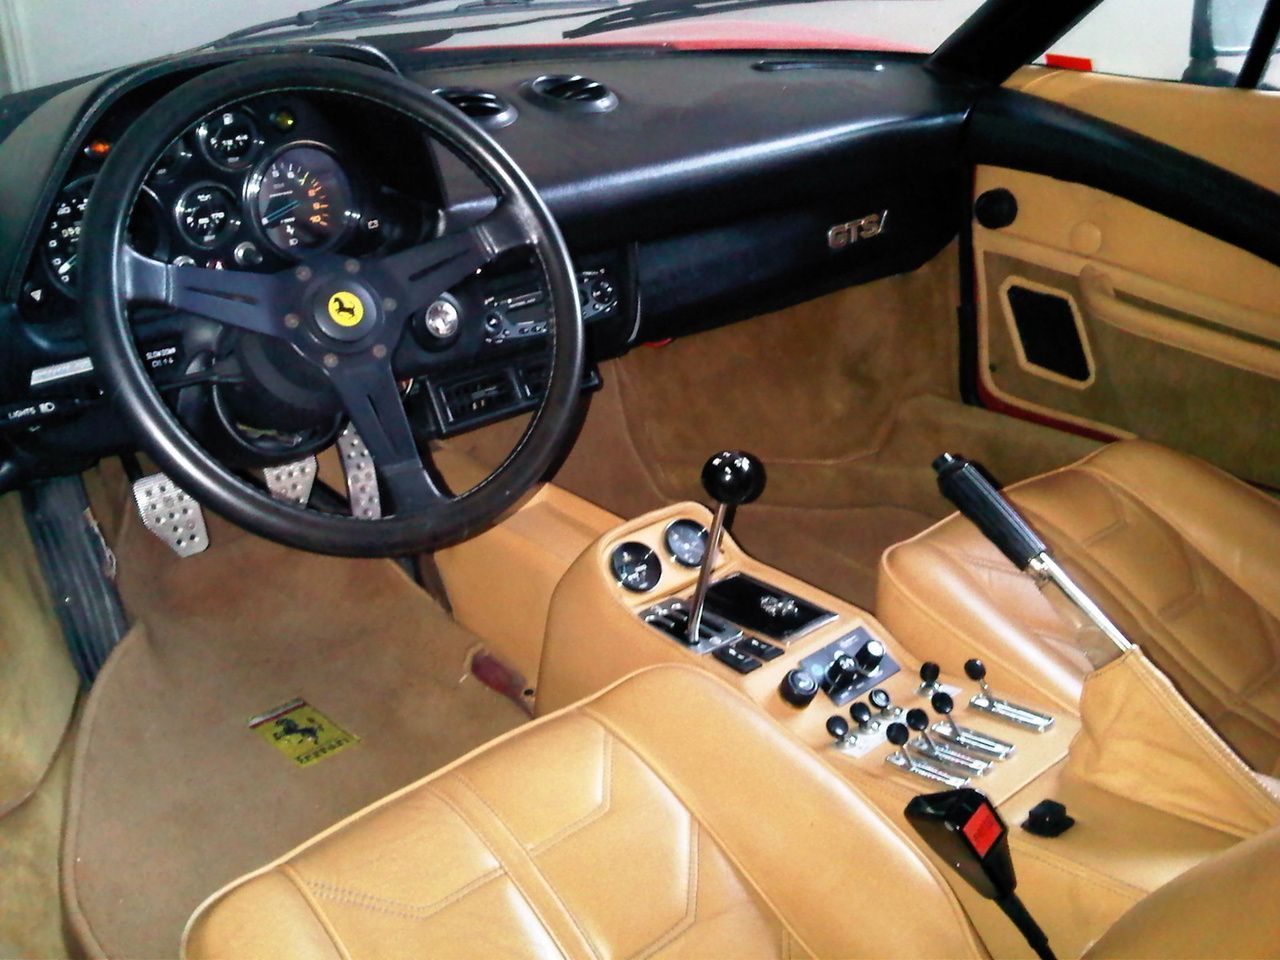 Interior of a Ferrari 308 with a manual transmission